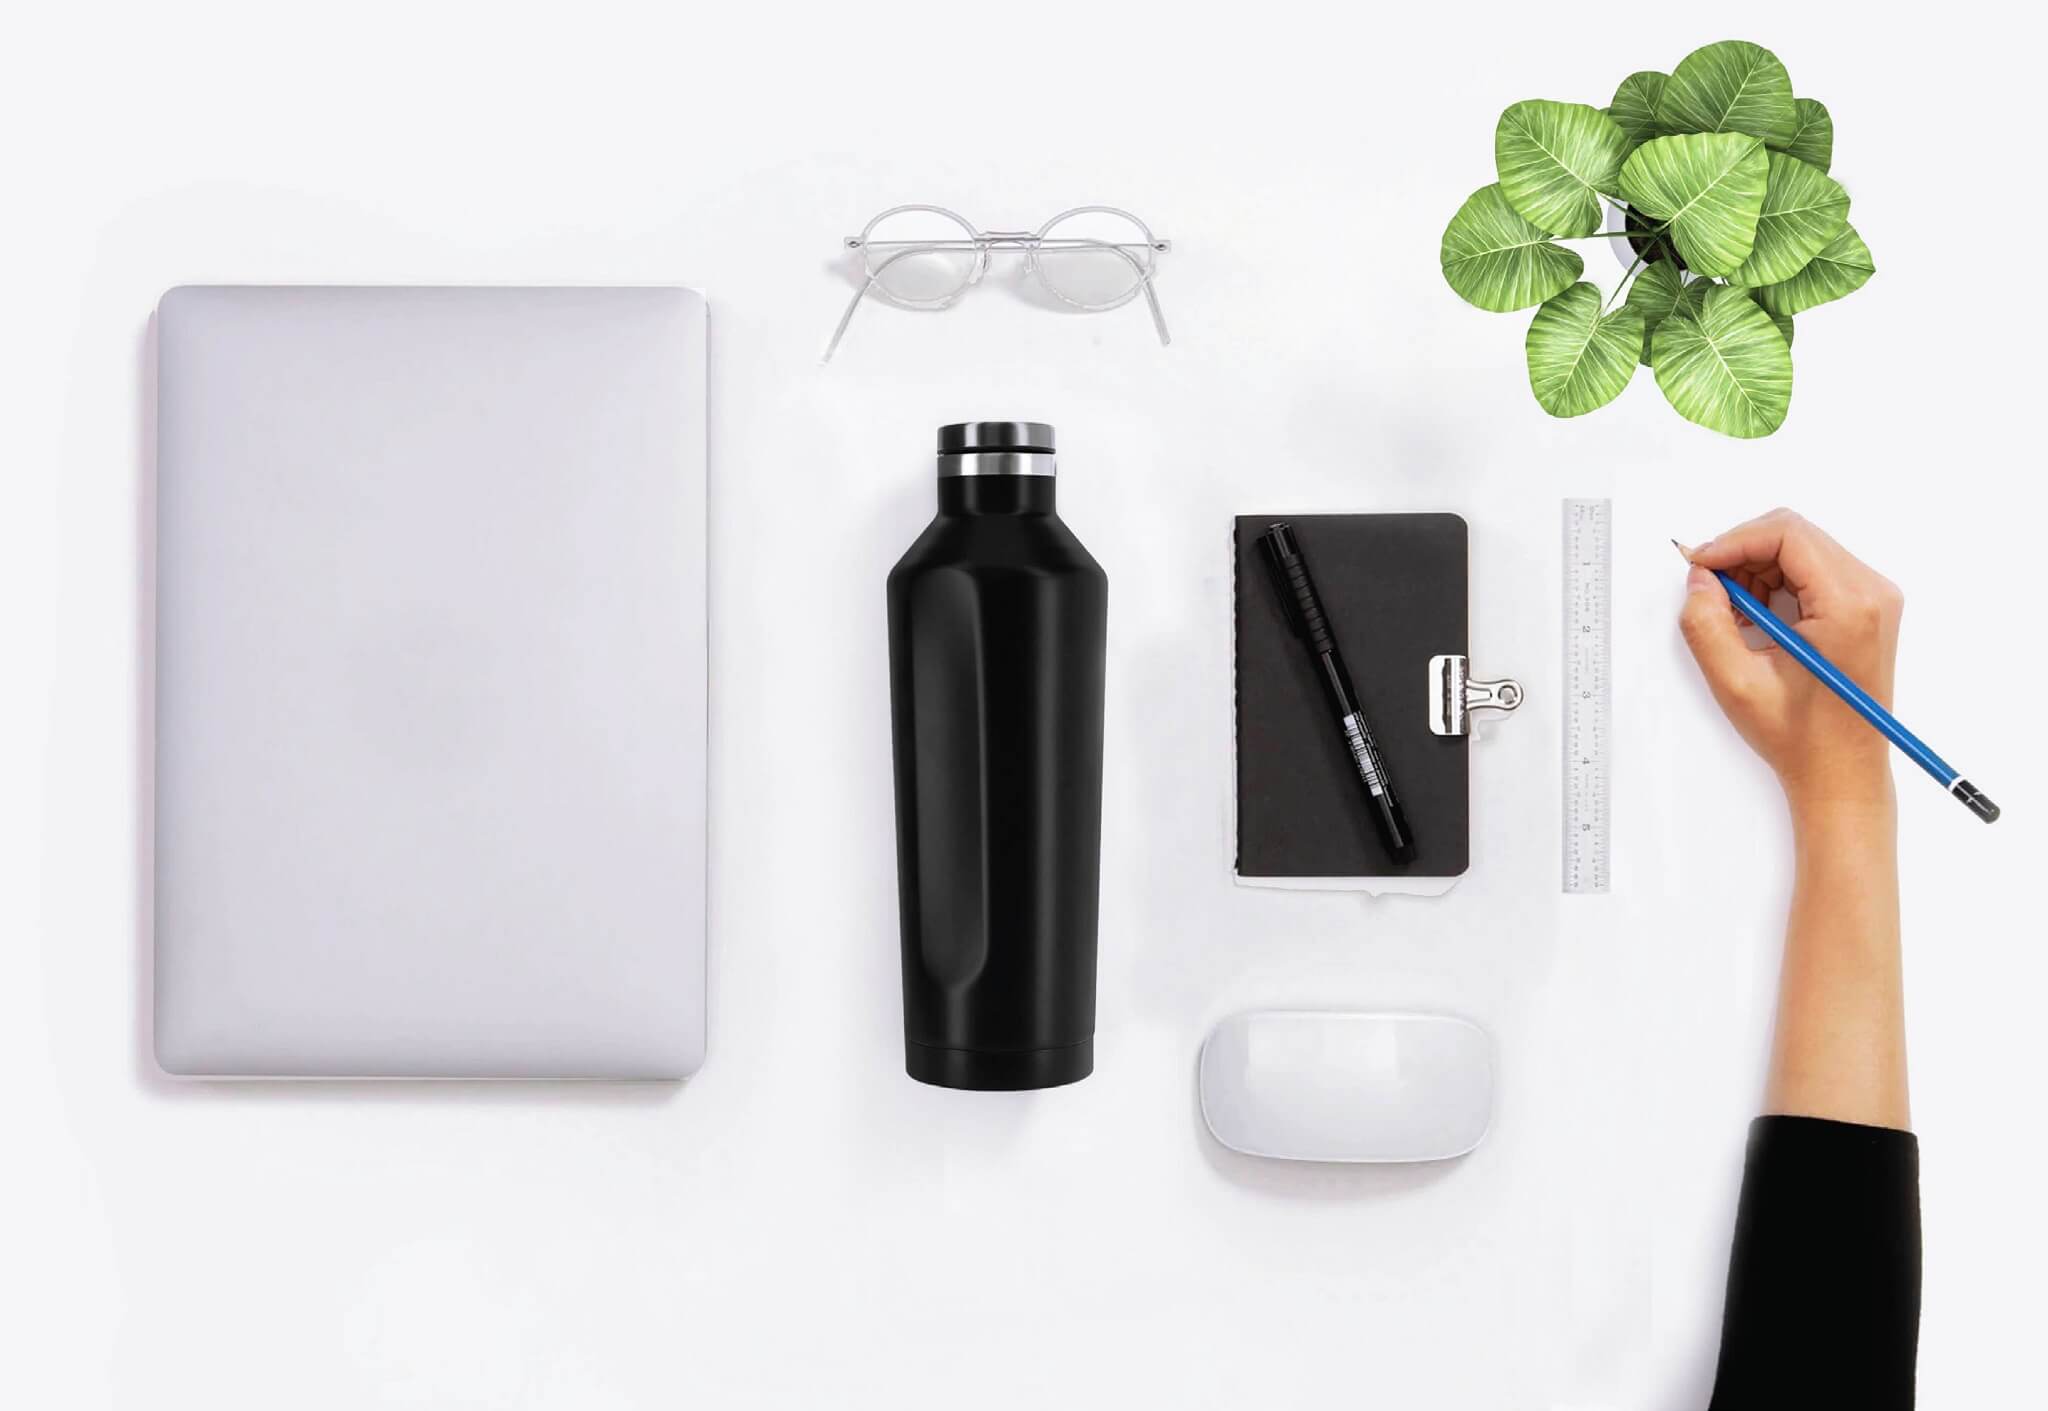 Black stainless steel bottle combined with other office accessories